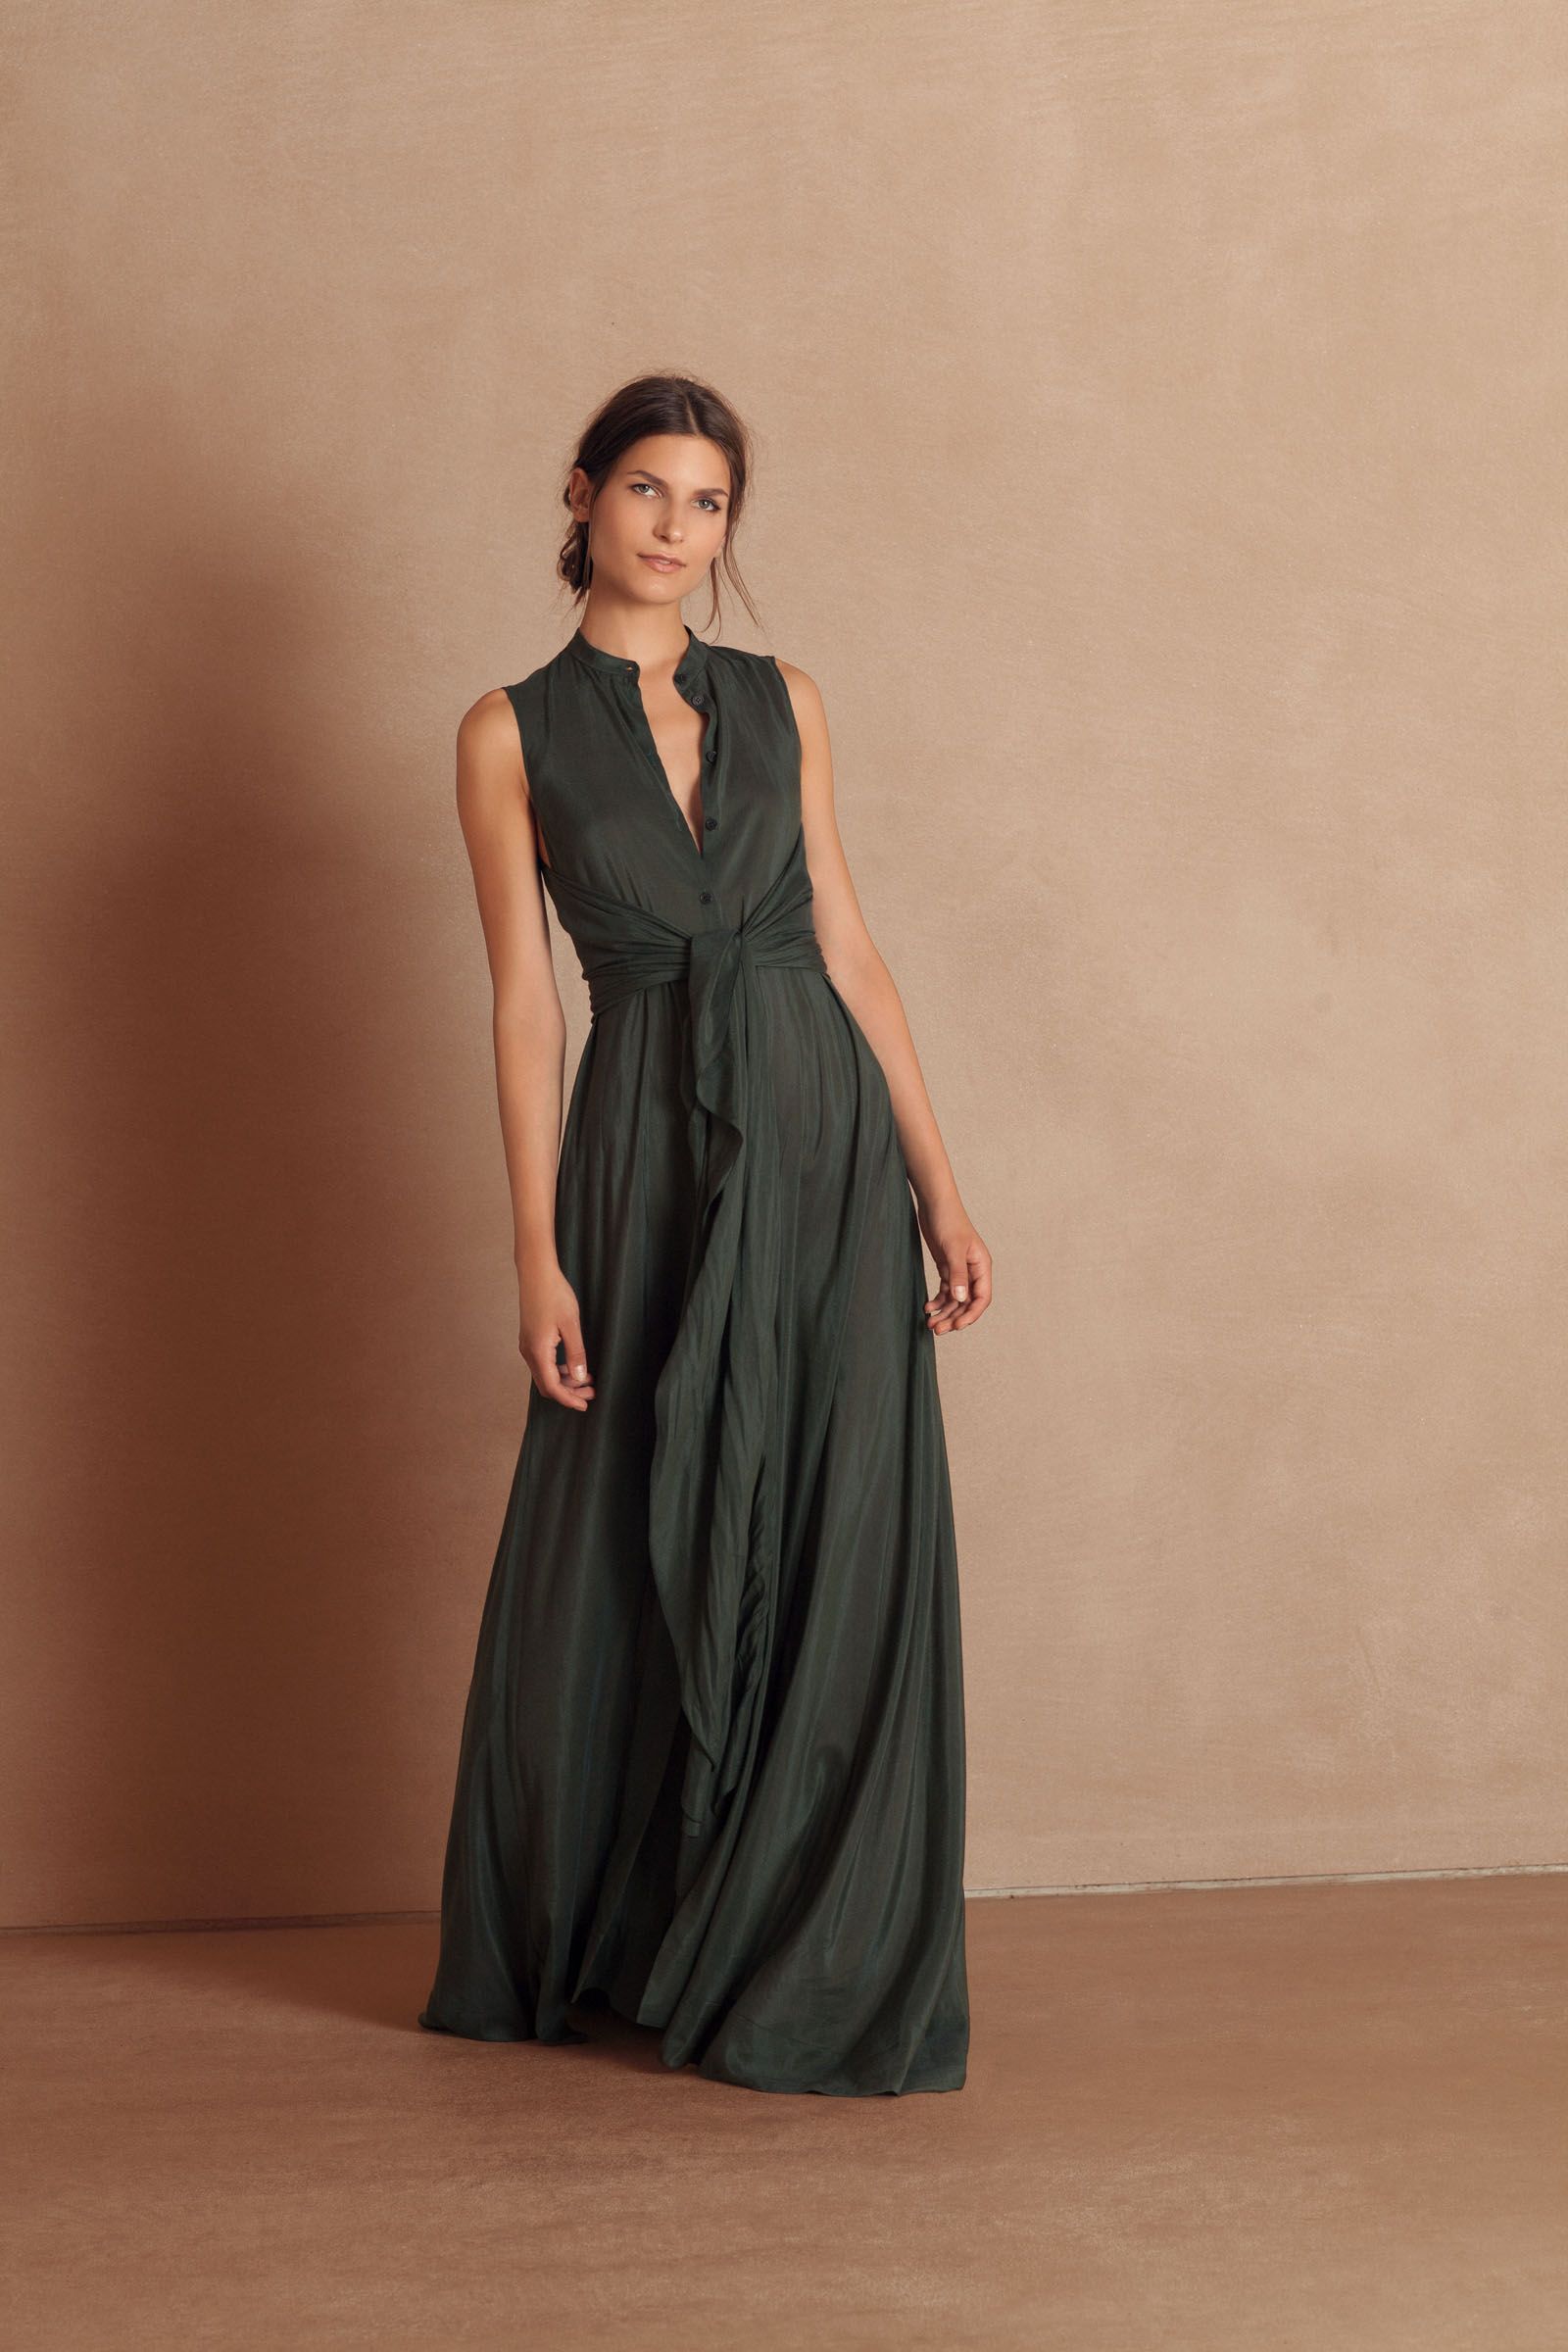 Long Dresses: Elegant and Timeless Attire for Special Occasions